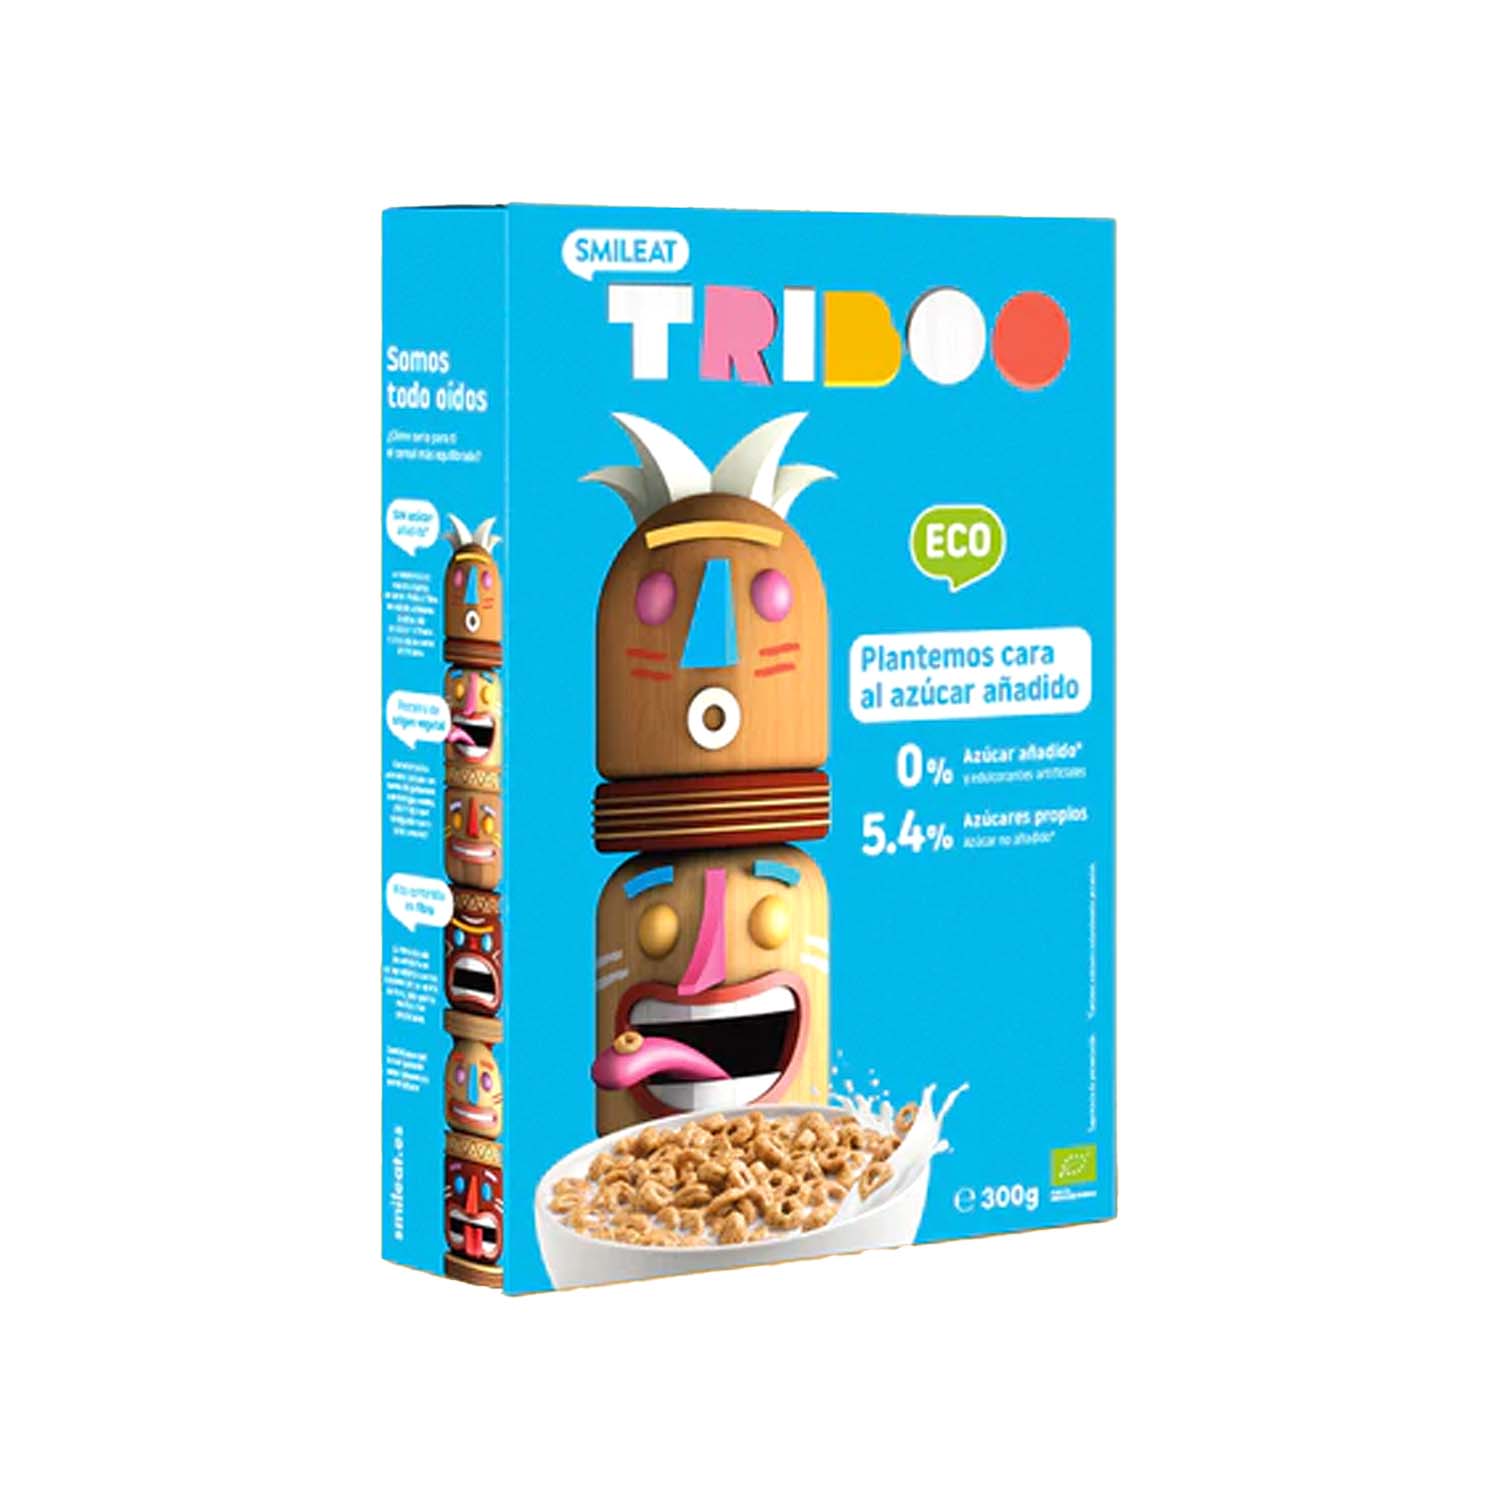 Cereales TRIBOO